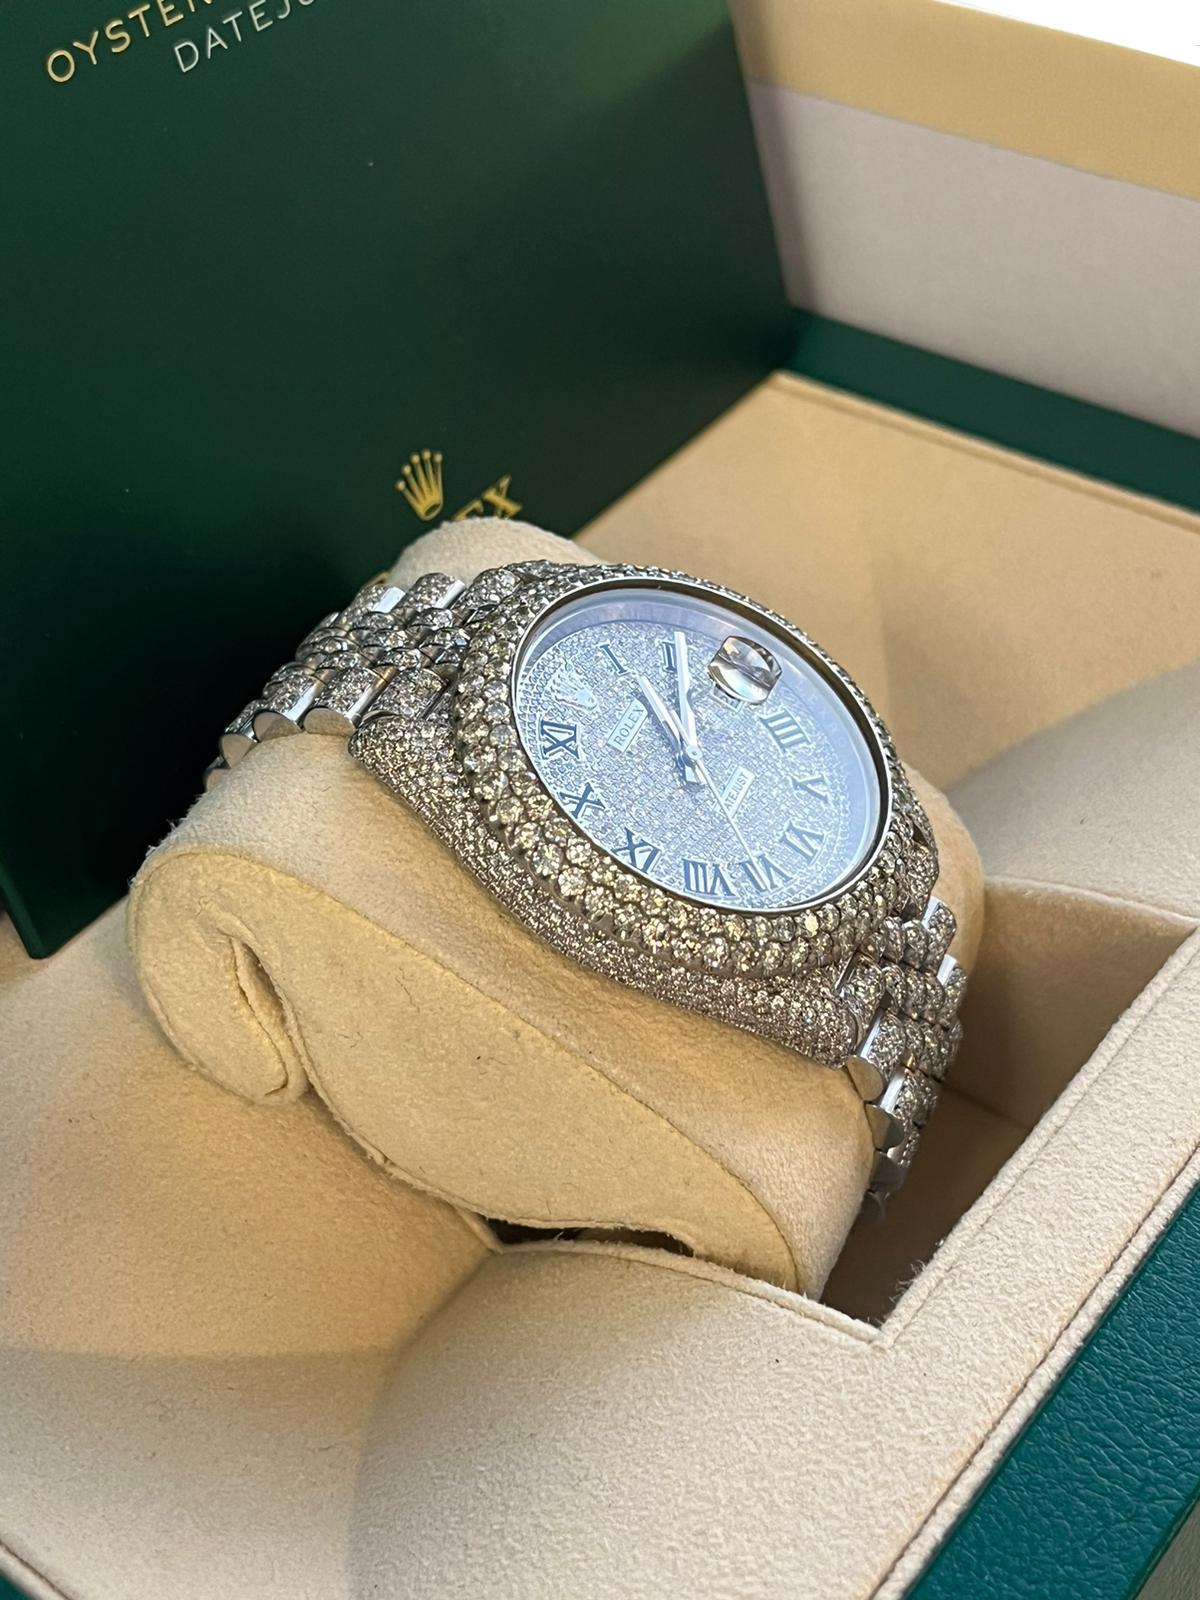 Rolex Datejust 41mm Iced Out Diamond Dial 14.75ct Jubilee Bracelet Watch 126300 For Sale 6